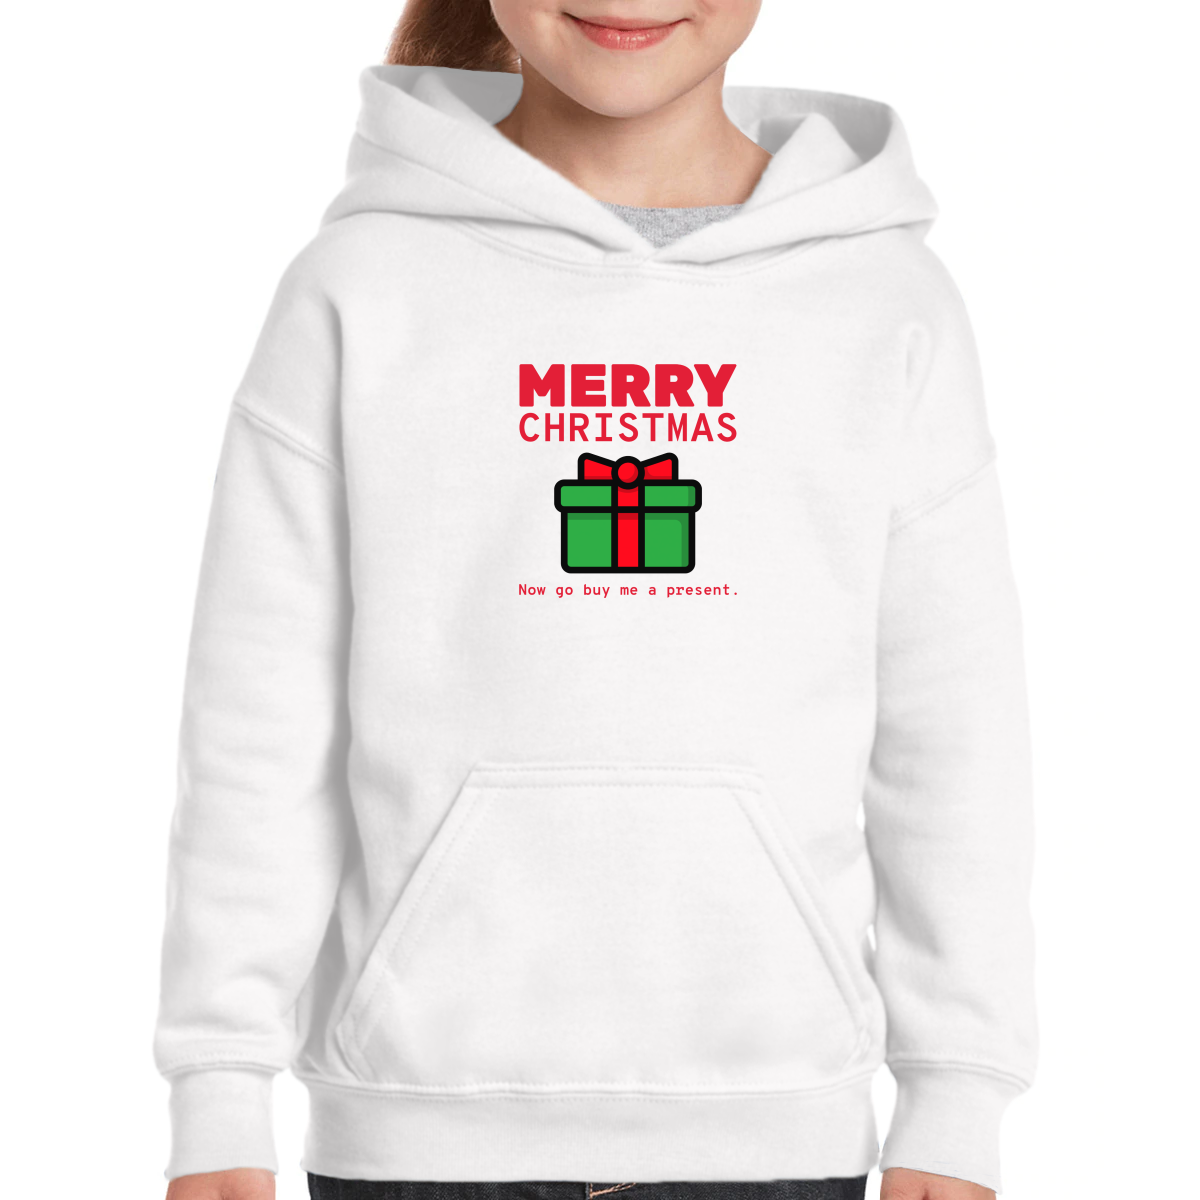 Merry Christmas Now Go Buy Me a Present Kids Hoodie | White